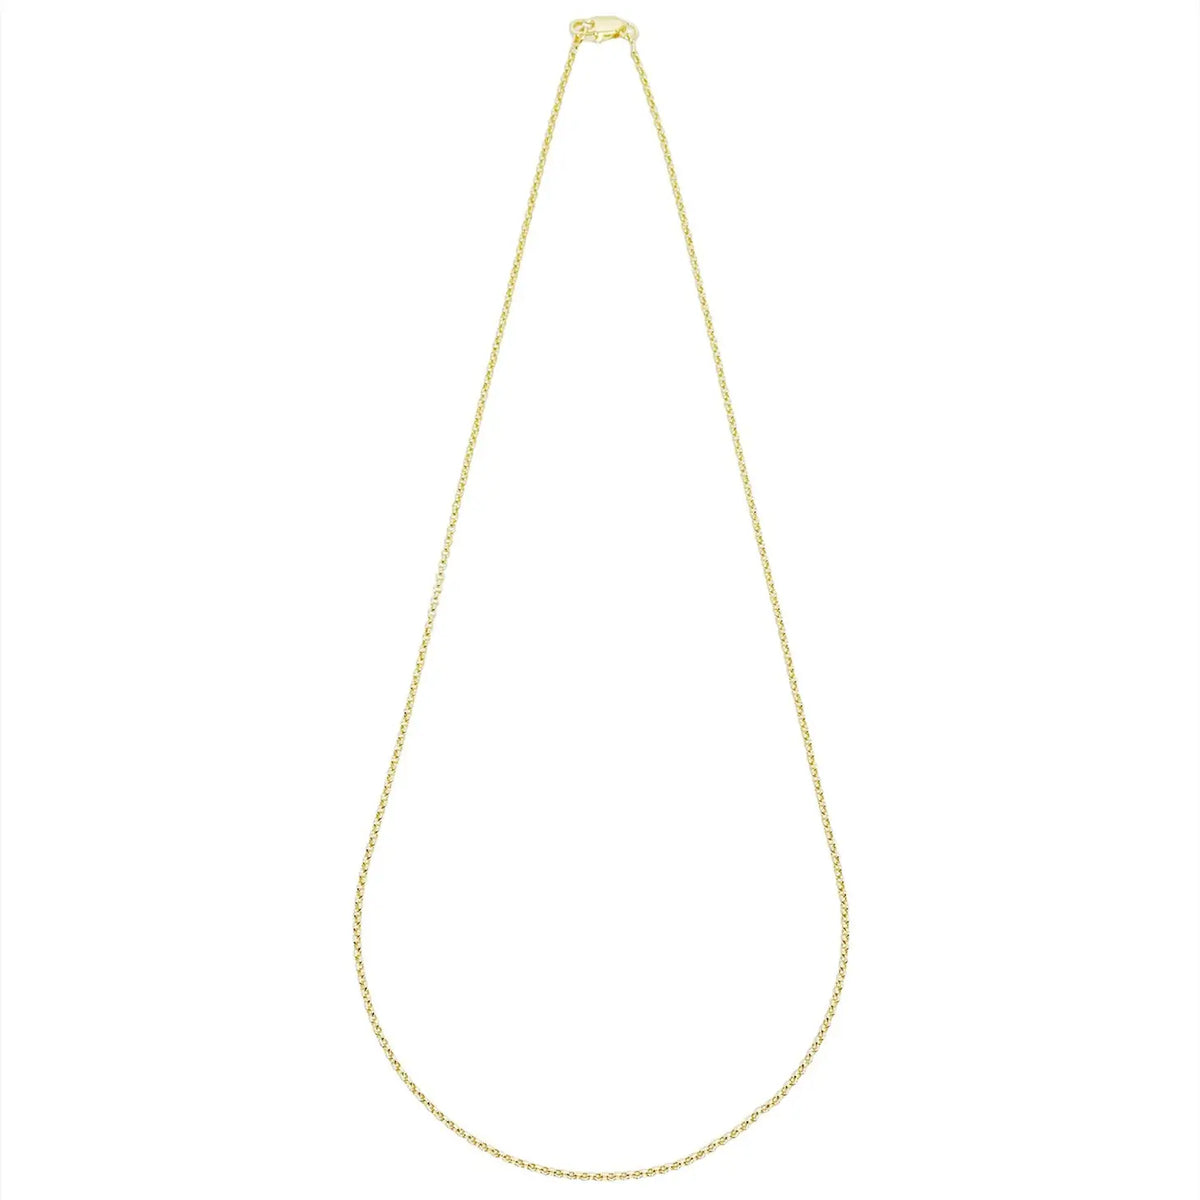 18k Gold Filled 1.5mm Rolo Chain Available in 18"